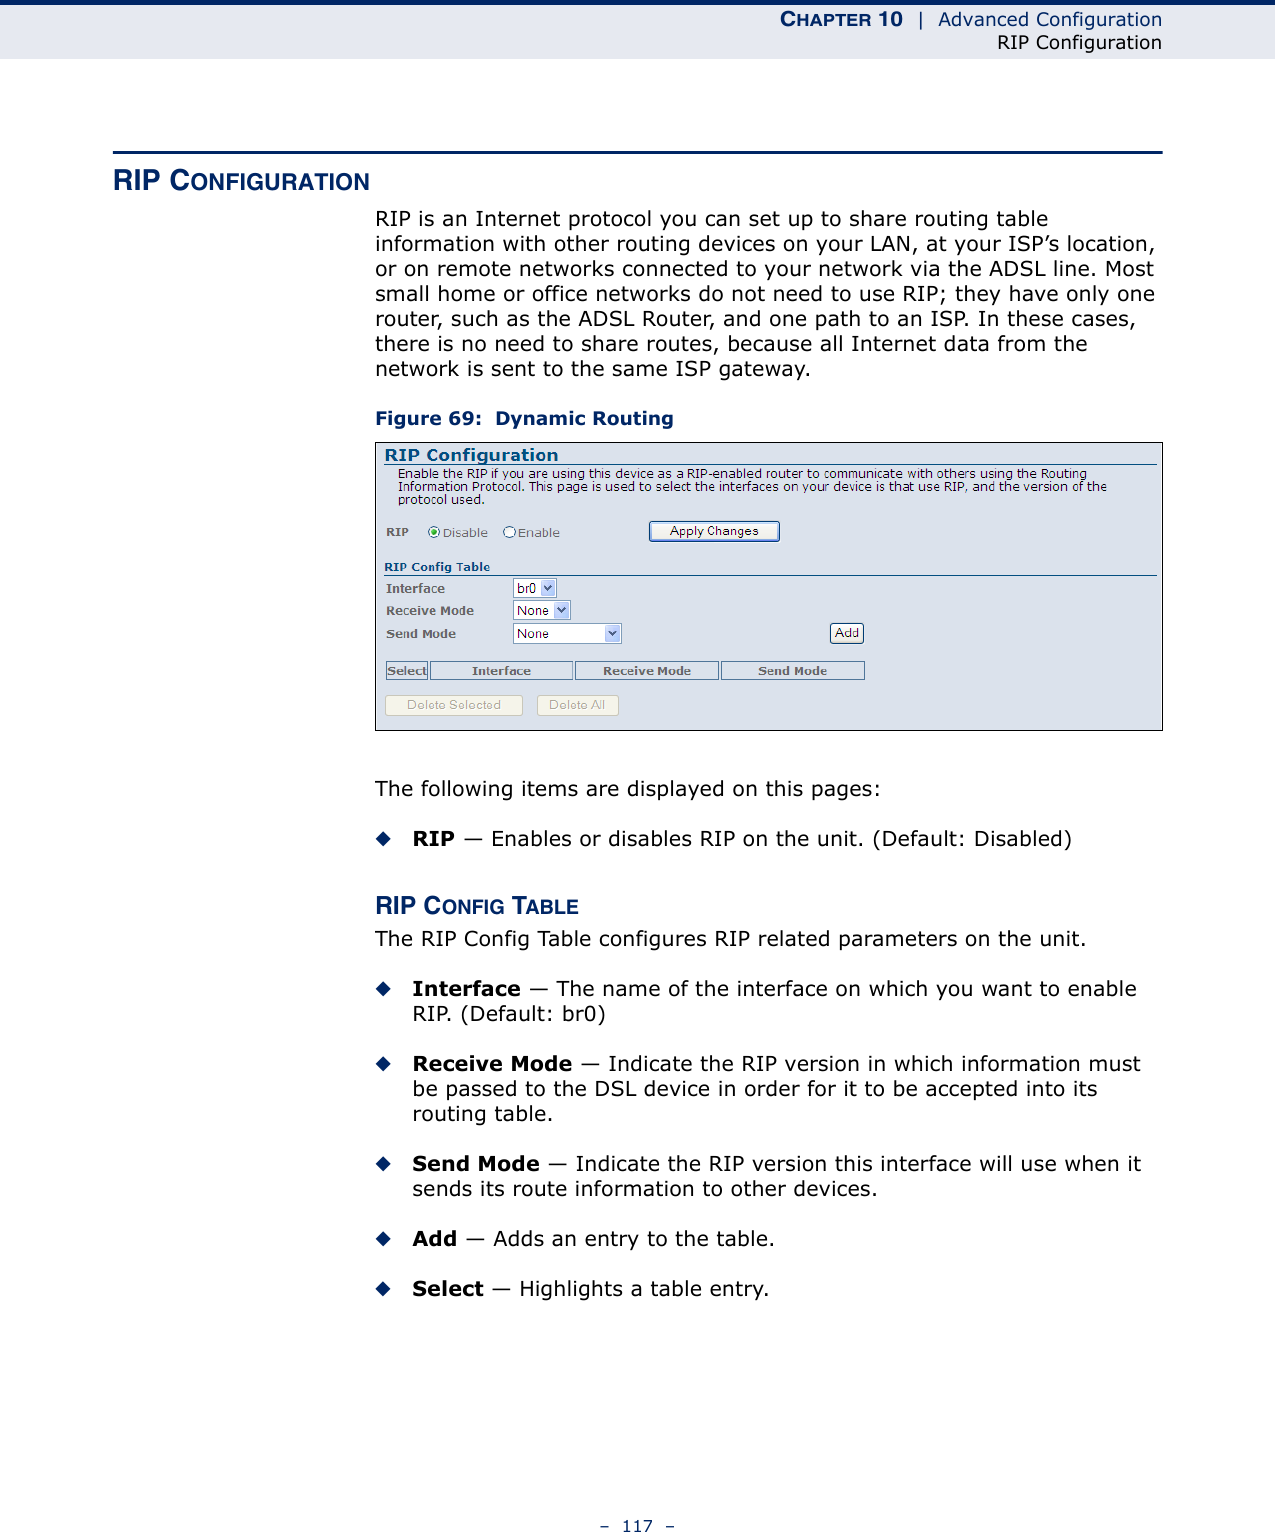 CHAPTER 10  |  Advanced ConfigurationRIP Configuration–  117  –RIP CONFIGURATIONRIP is an Internet protocol you can set up to share routing table information with other routing devices on your LAN, at your ISP’s location, or on remote networks connected to your network via the ADSL line. Most small home or office networks do not need to use RIP; they have only one router, such as the ADSL Router, and one path to an ISP. In these cases, there is no need to share routes, because all Internet data from the network is sent to the same ISP gateway. Figure 69:  Dynamic RoutingThe following items are displayed on this pages:◆RIP — Enables or disables RIP on the unit. (Default: Disabled)RIP CONFIG TABLEThe RIP Config Table configures RIP related parameters on the unit.◆Interface — The name of the interface on which you want to enable RIP. (Default: br0)◆Receive Mode — Indicate the RIP version in which information must be passed to the DSL device in order for it to be accepted into its routing table. ◆Send Mode — Indicate the RIP version this interface will use when it sends its route information to other devices. ◆Add — Adds an entry to the table.◆Select — Highlights a table entry.